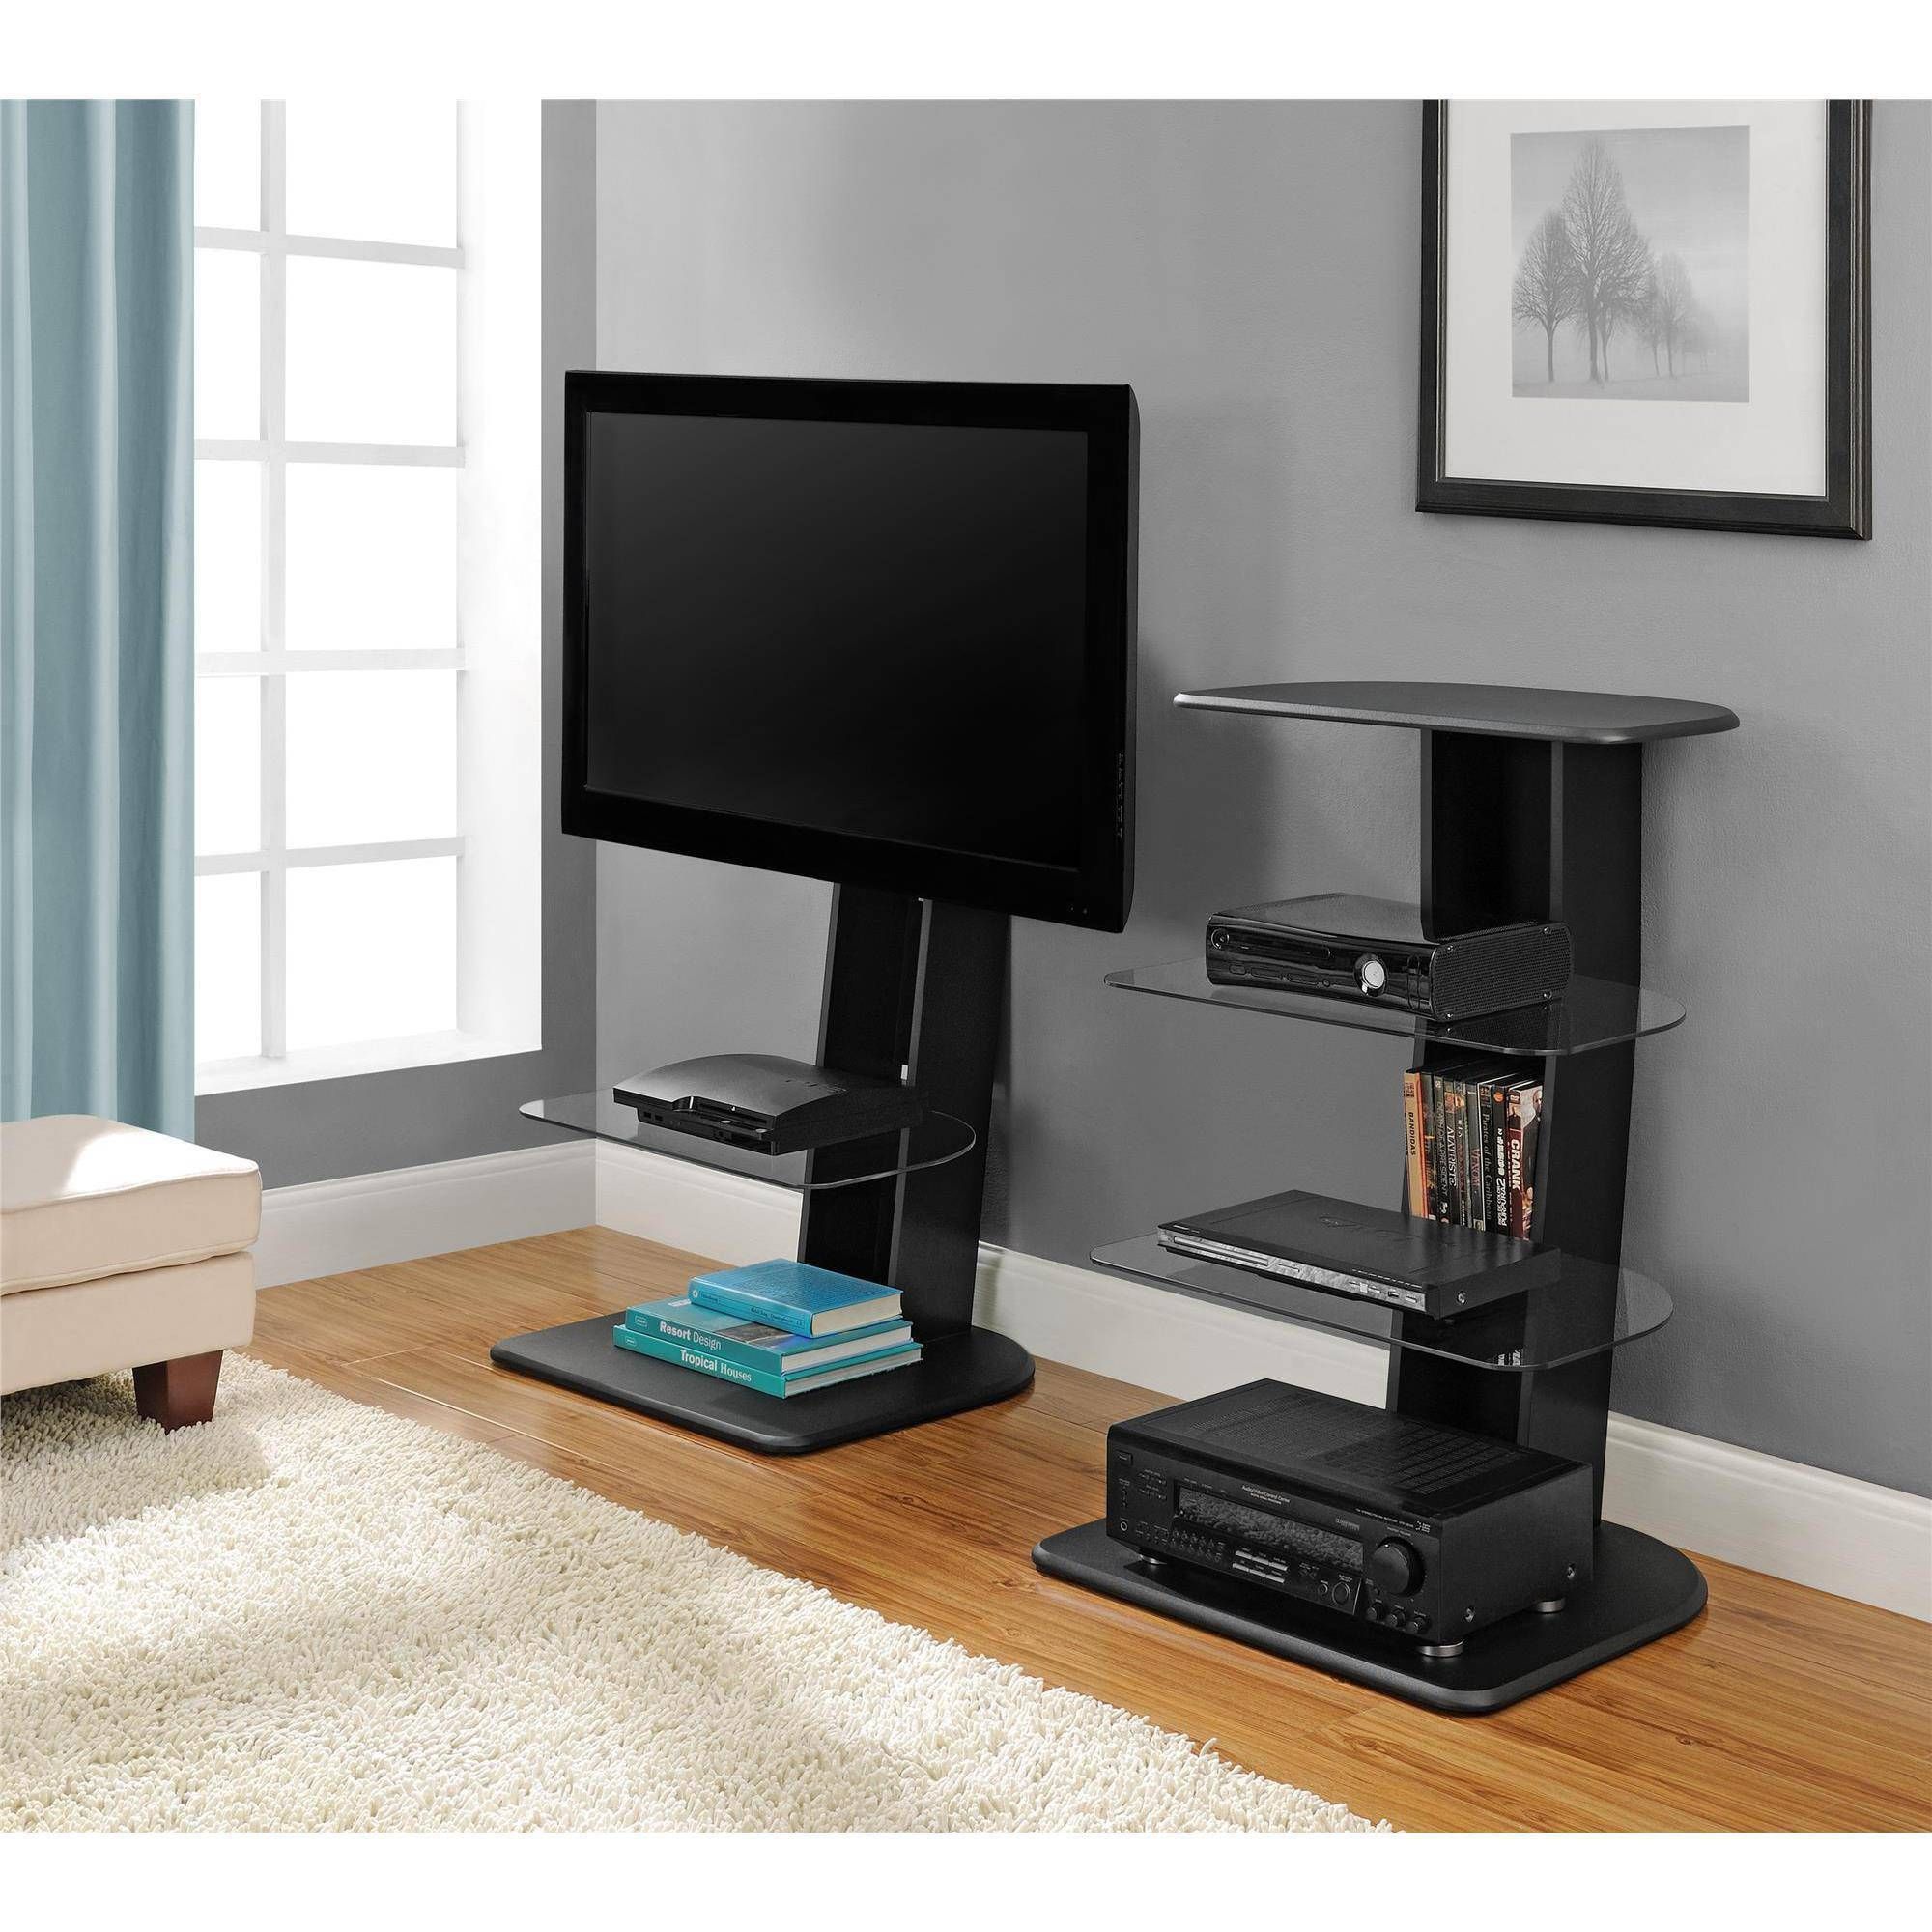 Ameriwood Home Galaxy Tv Stand With Mount For Tvs Up To 50", Black Throughout Tv Stand With Mount (View 10 of 15)